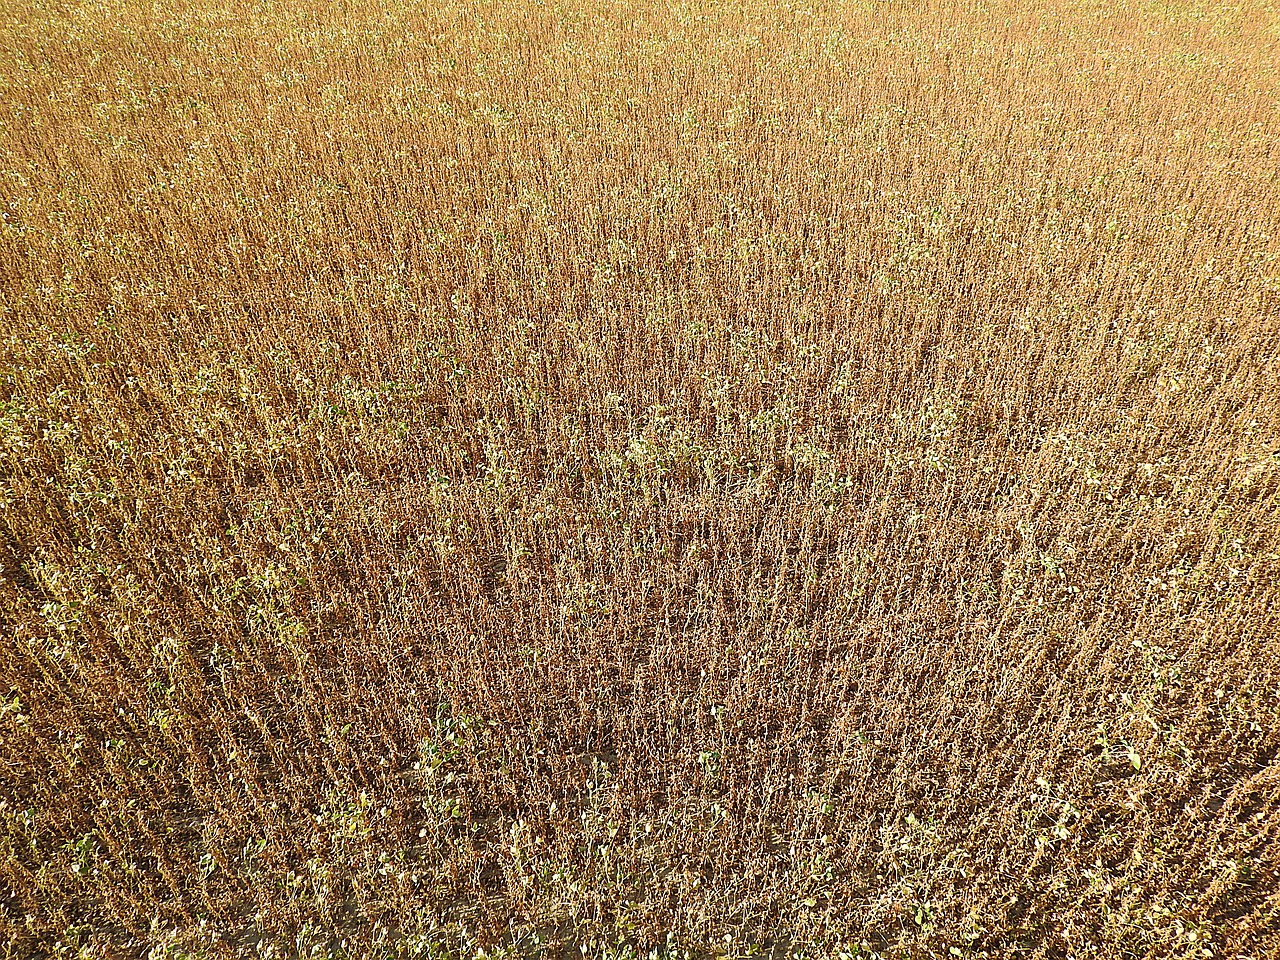 cereals soy field free photo